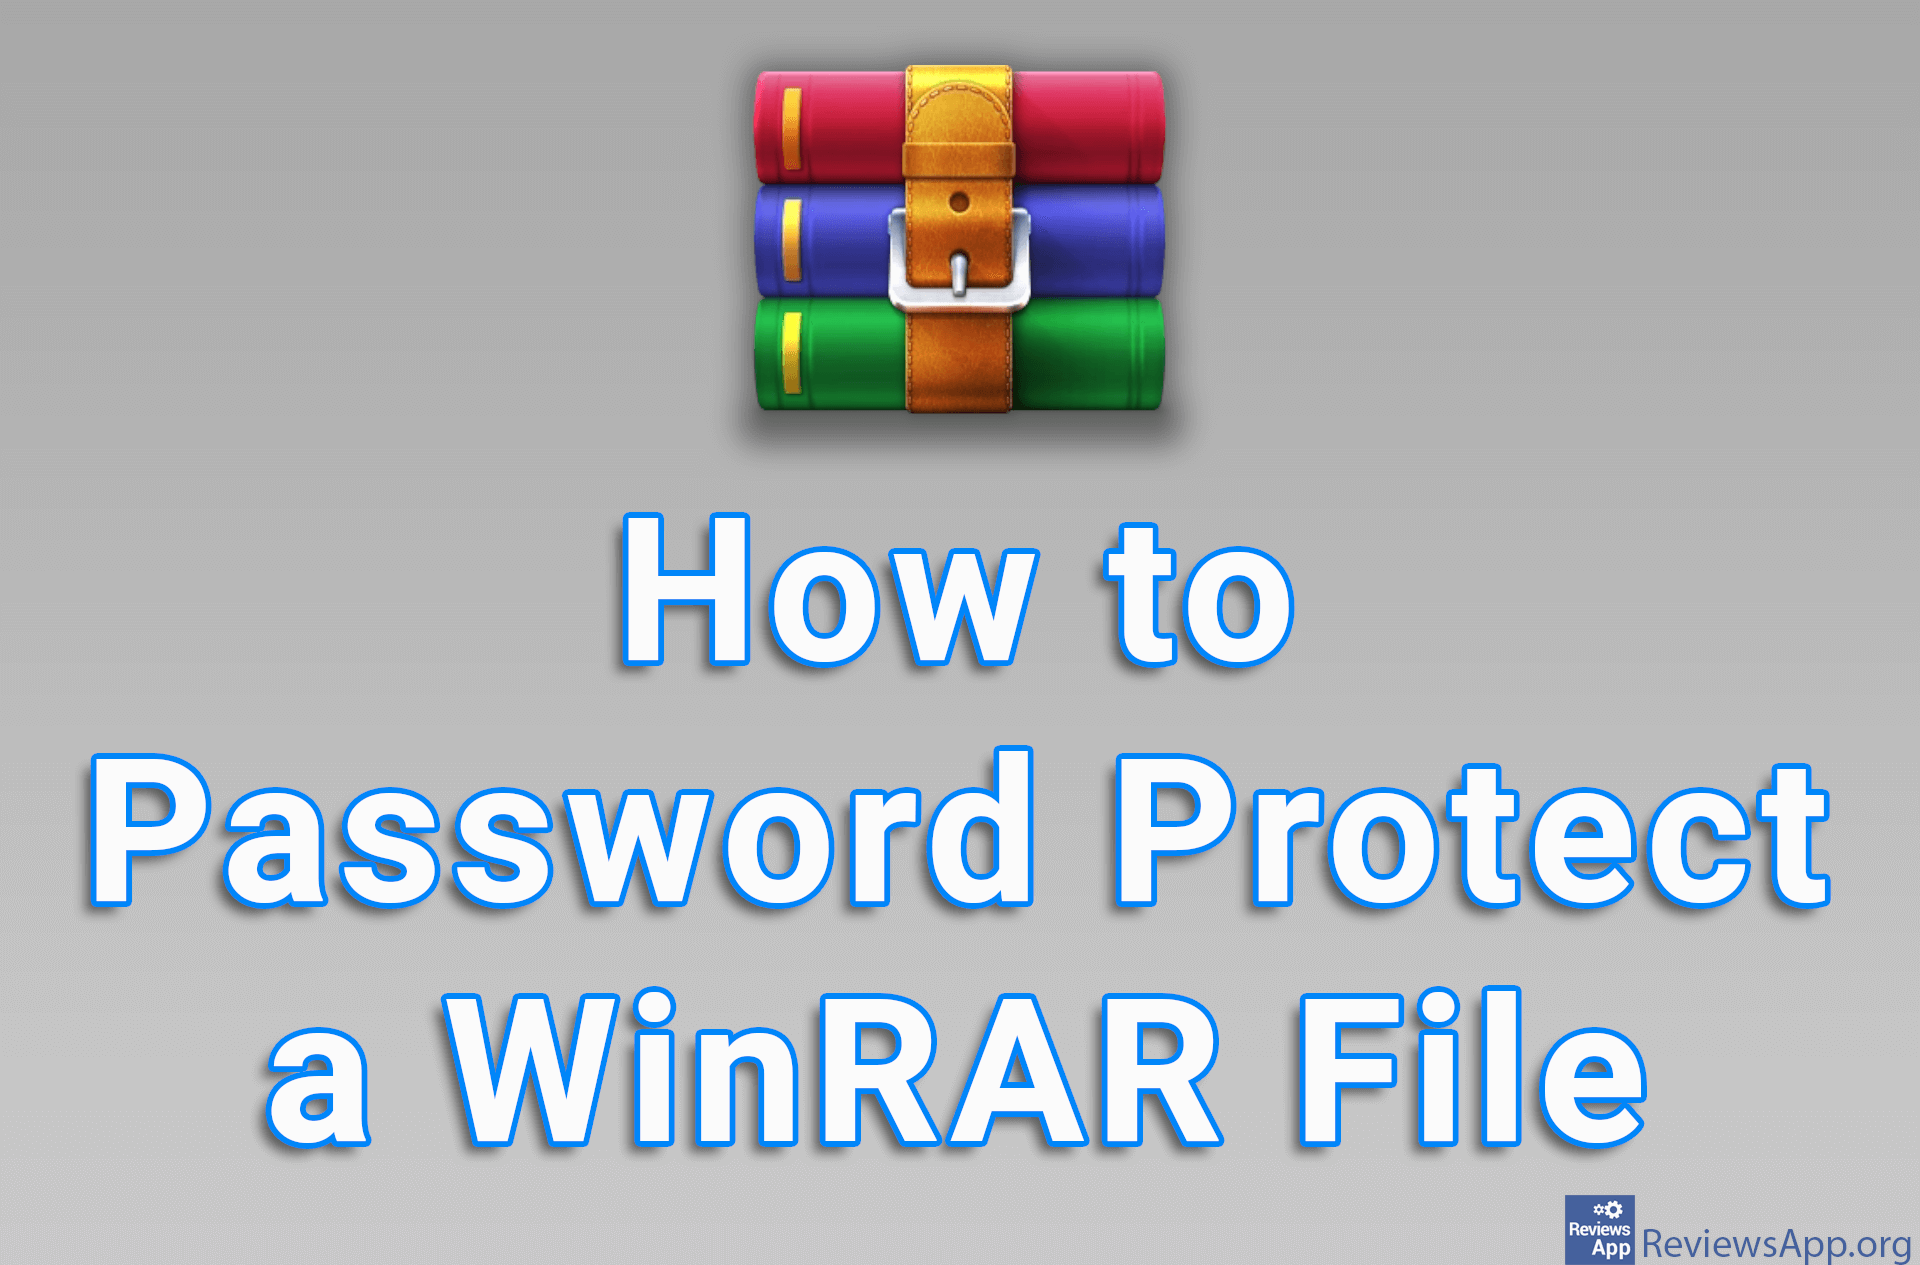 How to Password Protect a WinRAR File